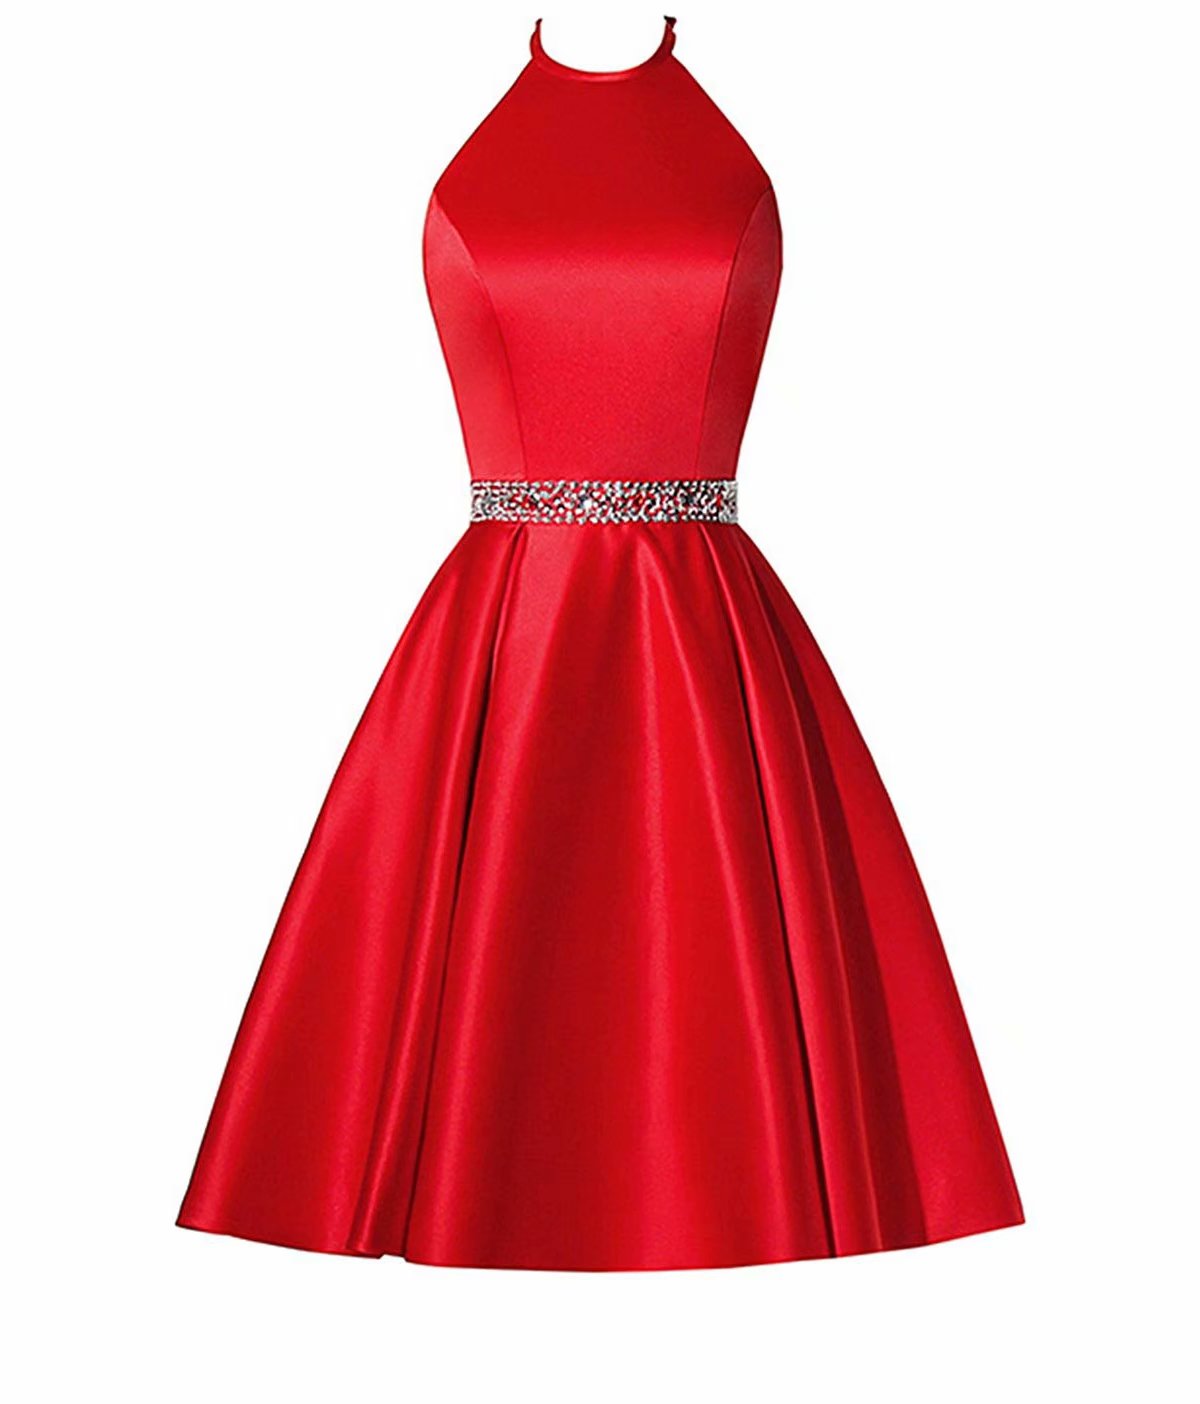 Sexy Red Short Homecoming Dress Halter Neck Beading Evening Cocktail Gown Bridesmaid Formal Dresses